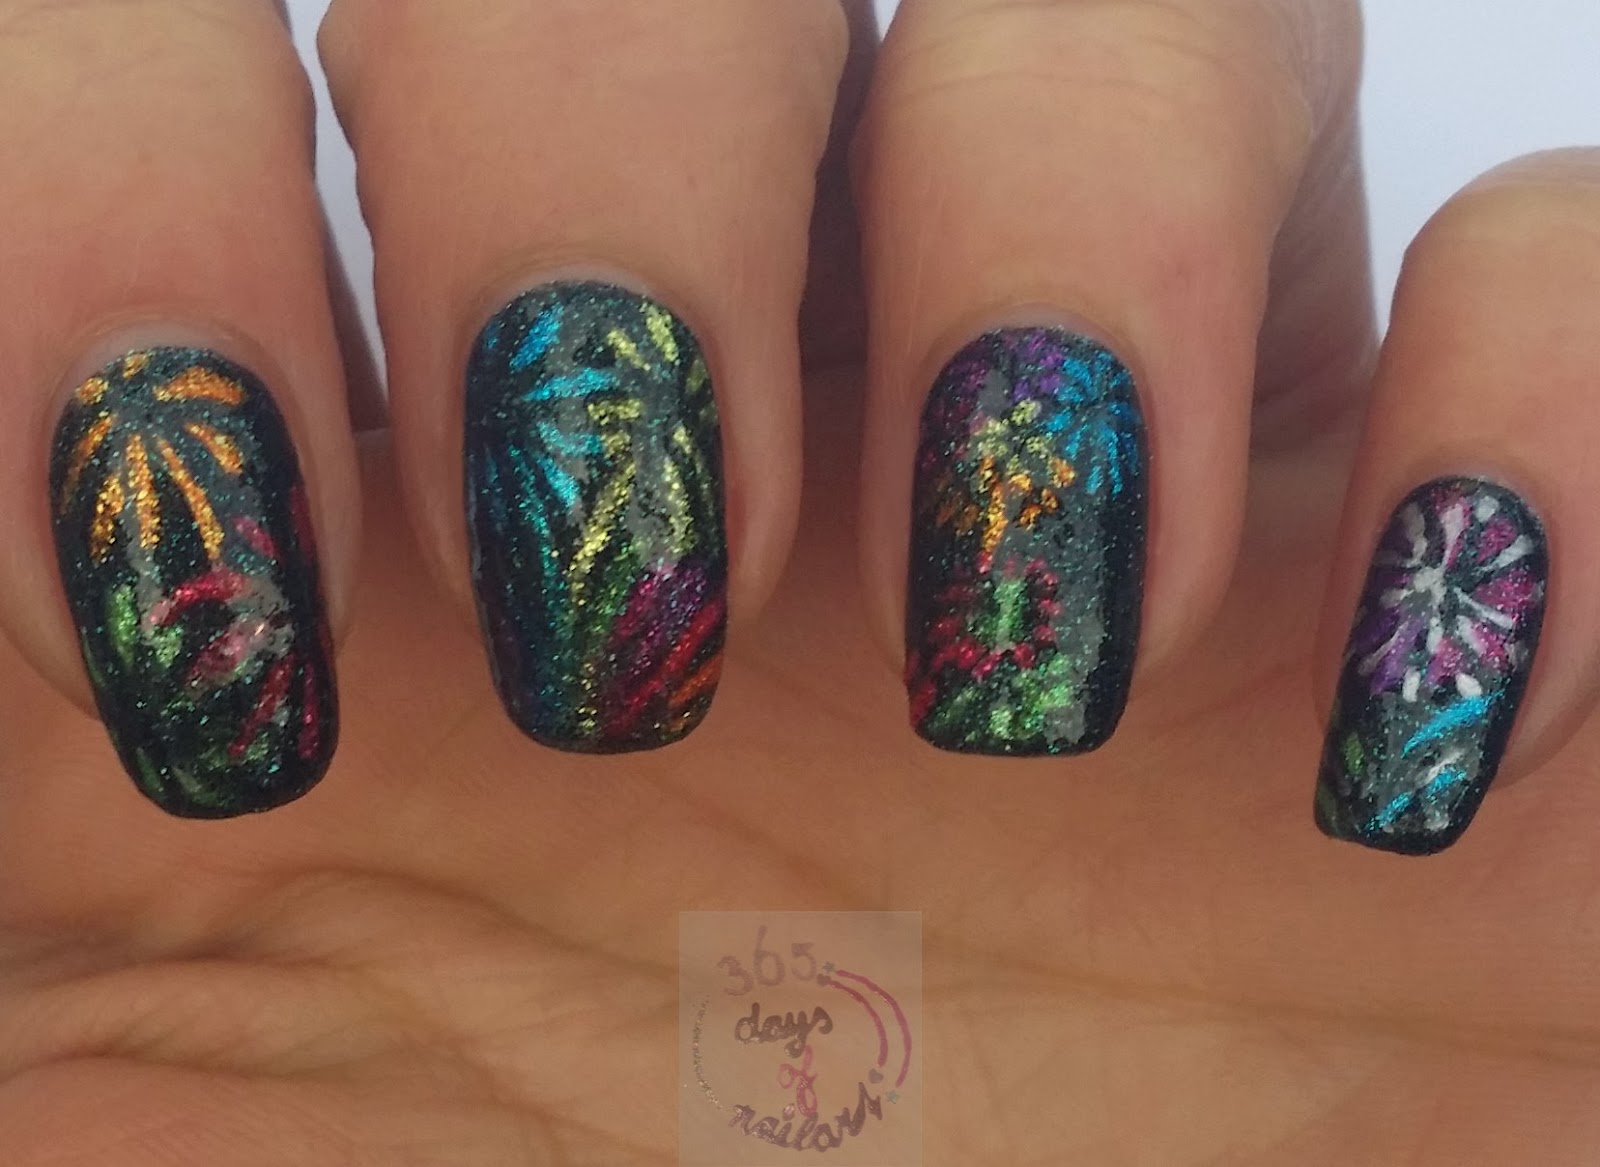 10. National Day Nail Art with Fireworks Designs - wide 7